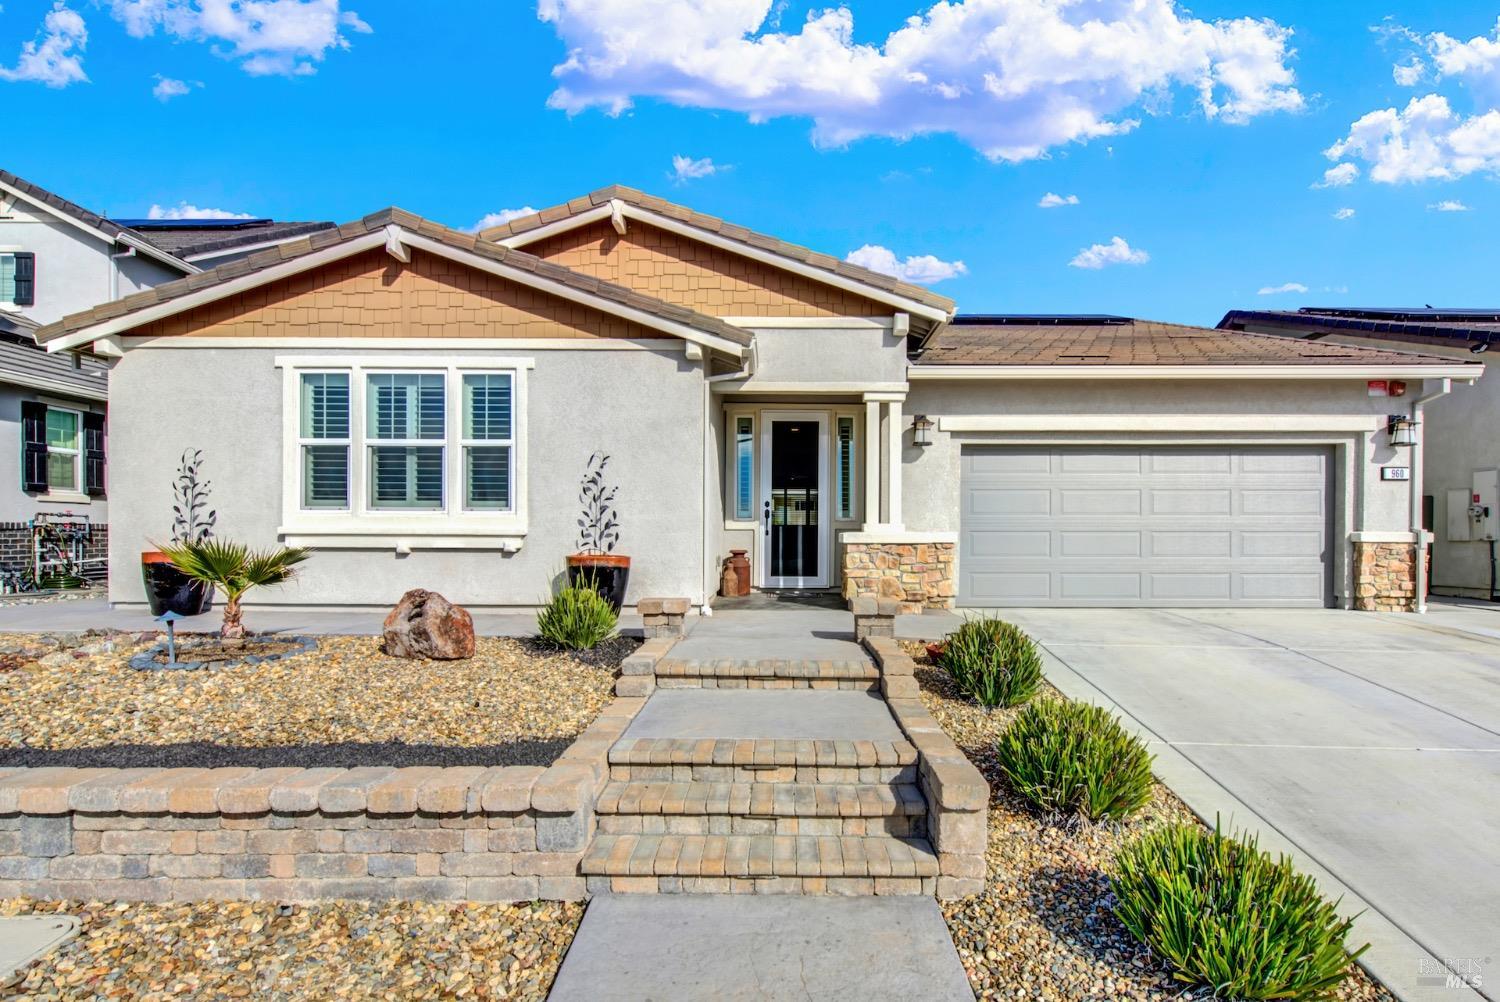 Photo of 960 Day Lilly Dr in Vacaville, CA